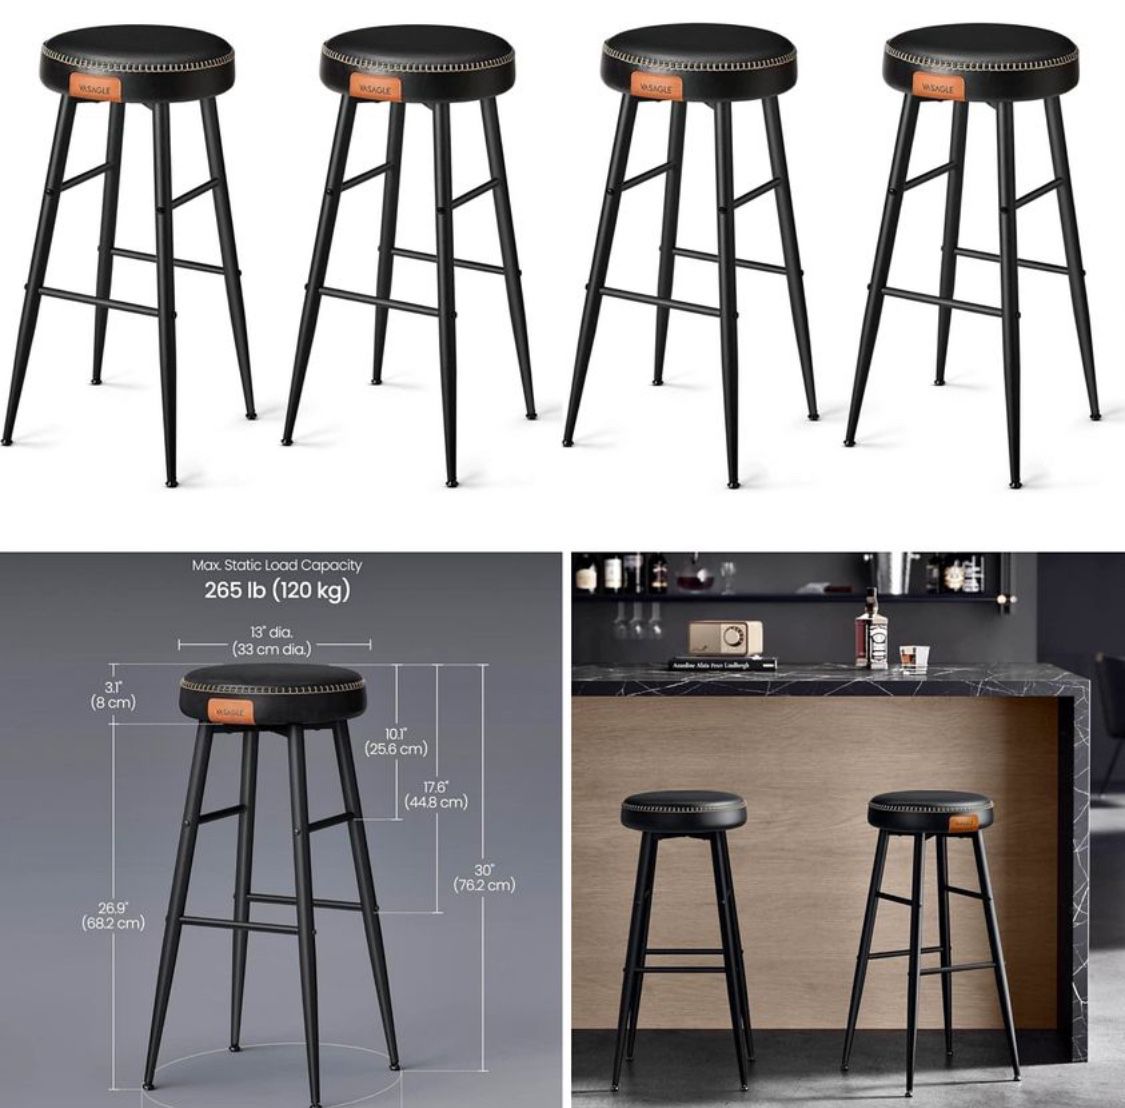 Bar Stools Set of https://offerup.com/redirect/?o=NC5CYXI= Height Bar Stools, Kitchen Counter Stools, Mid-Century Modern Backless Counter Stools, 30-I